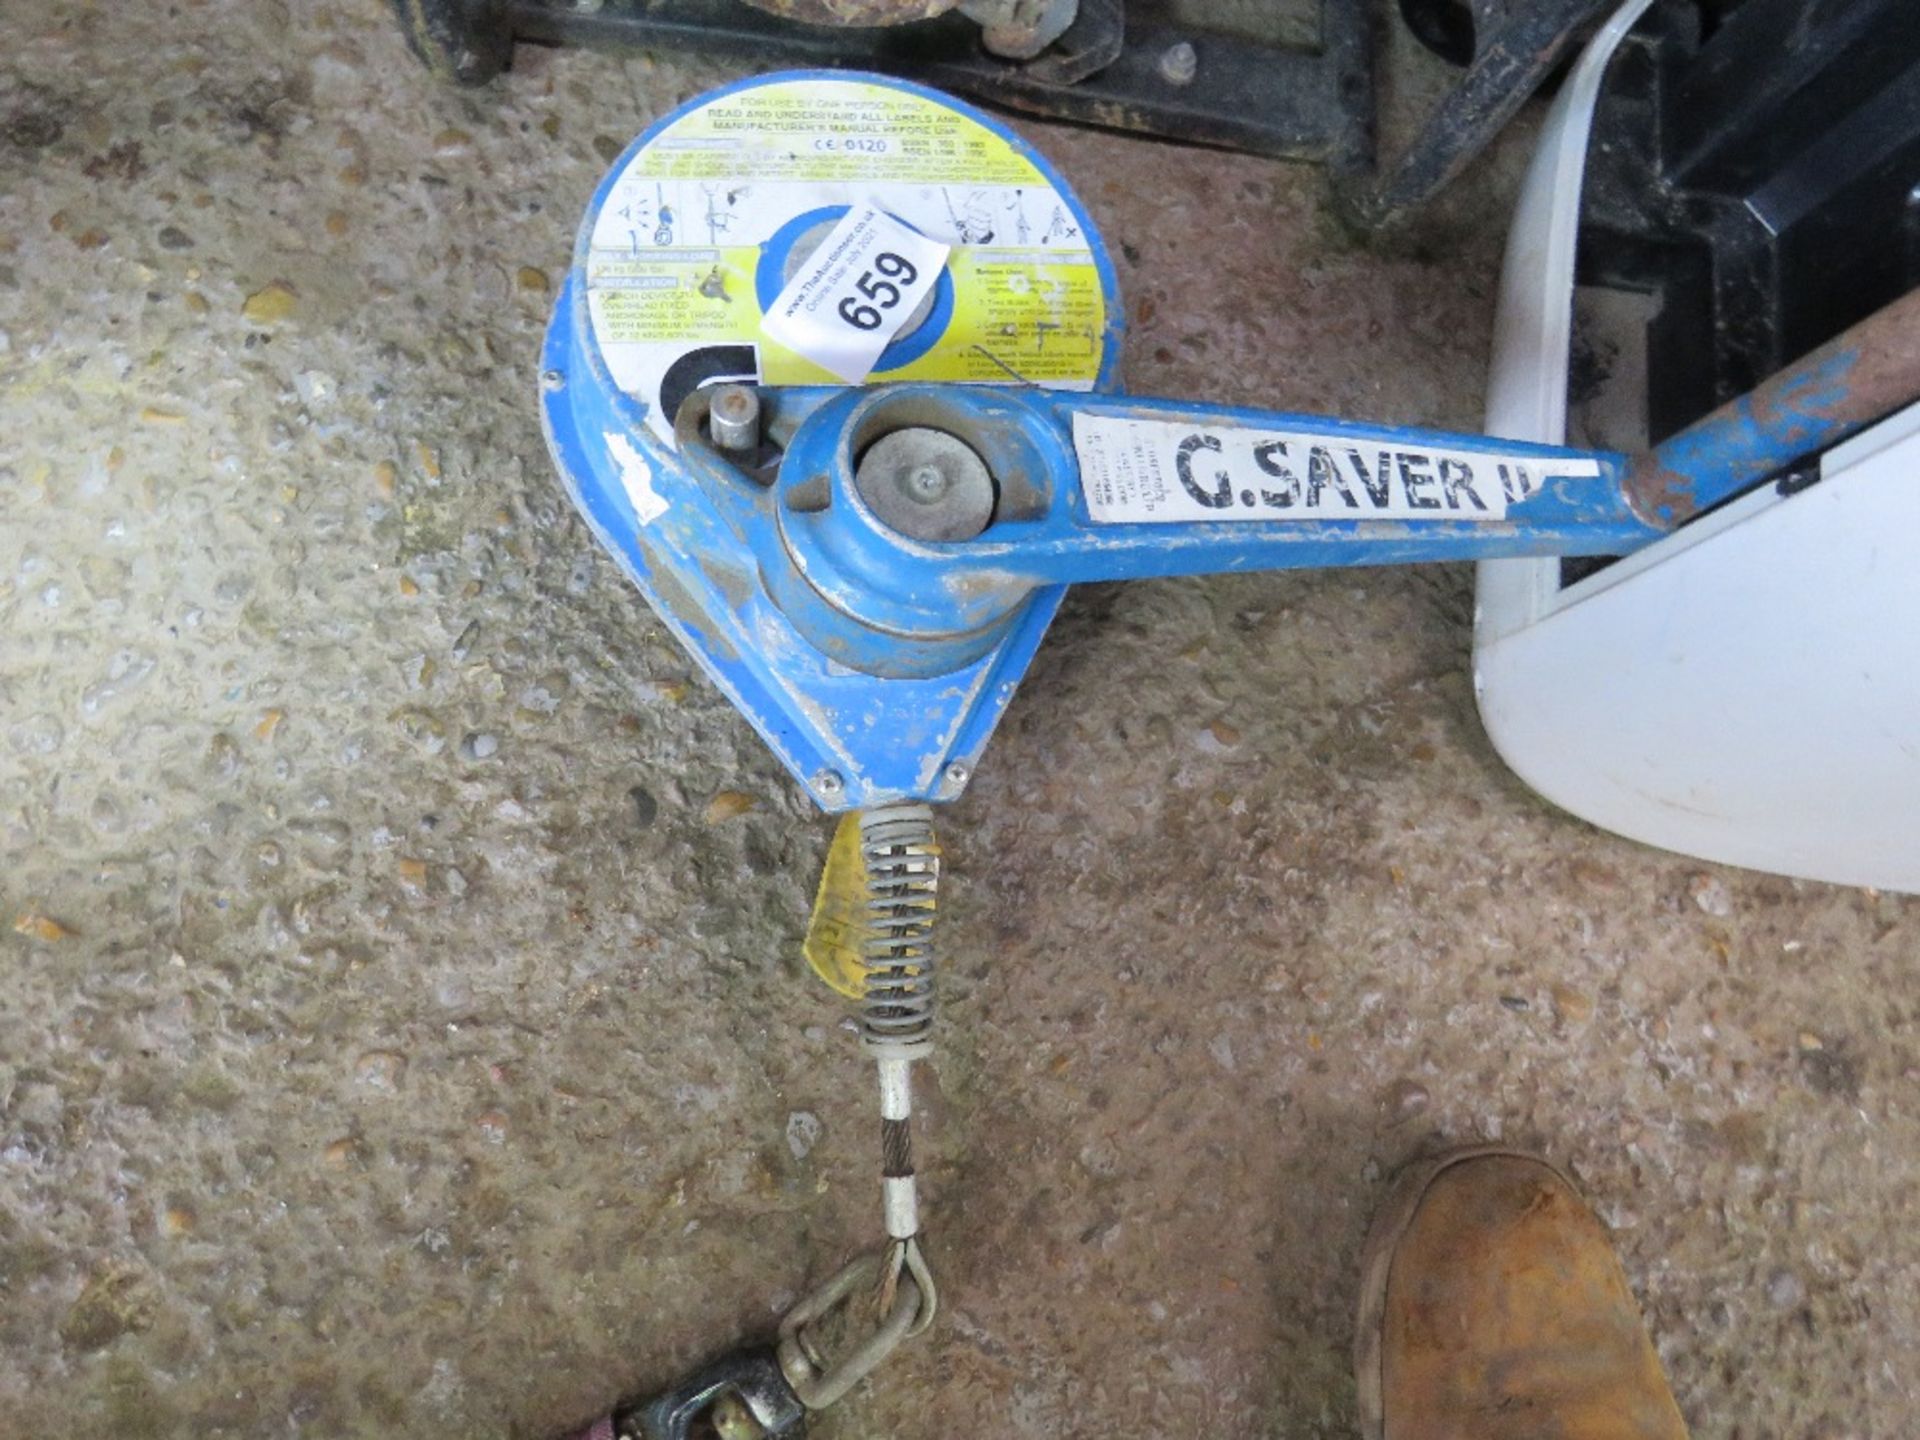 G SAVER MANHOLE RECOVERY WINCH UNIT, UNTESTED.